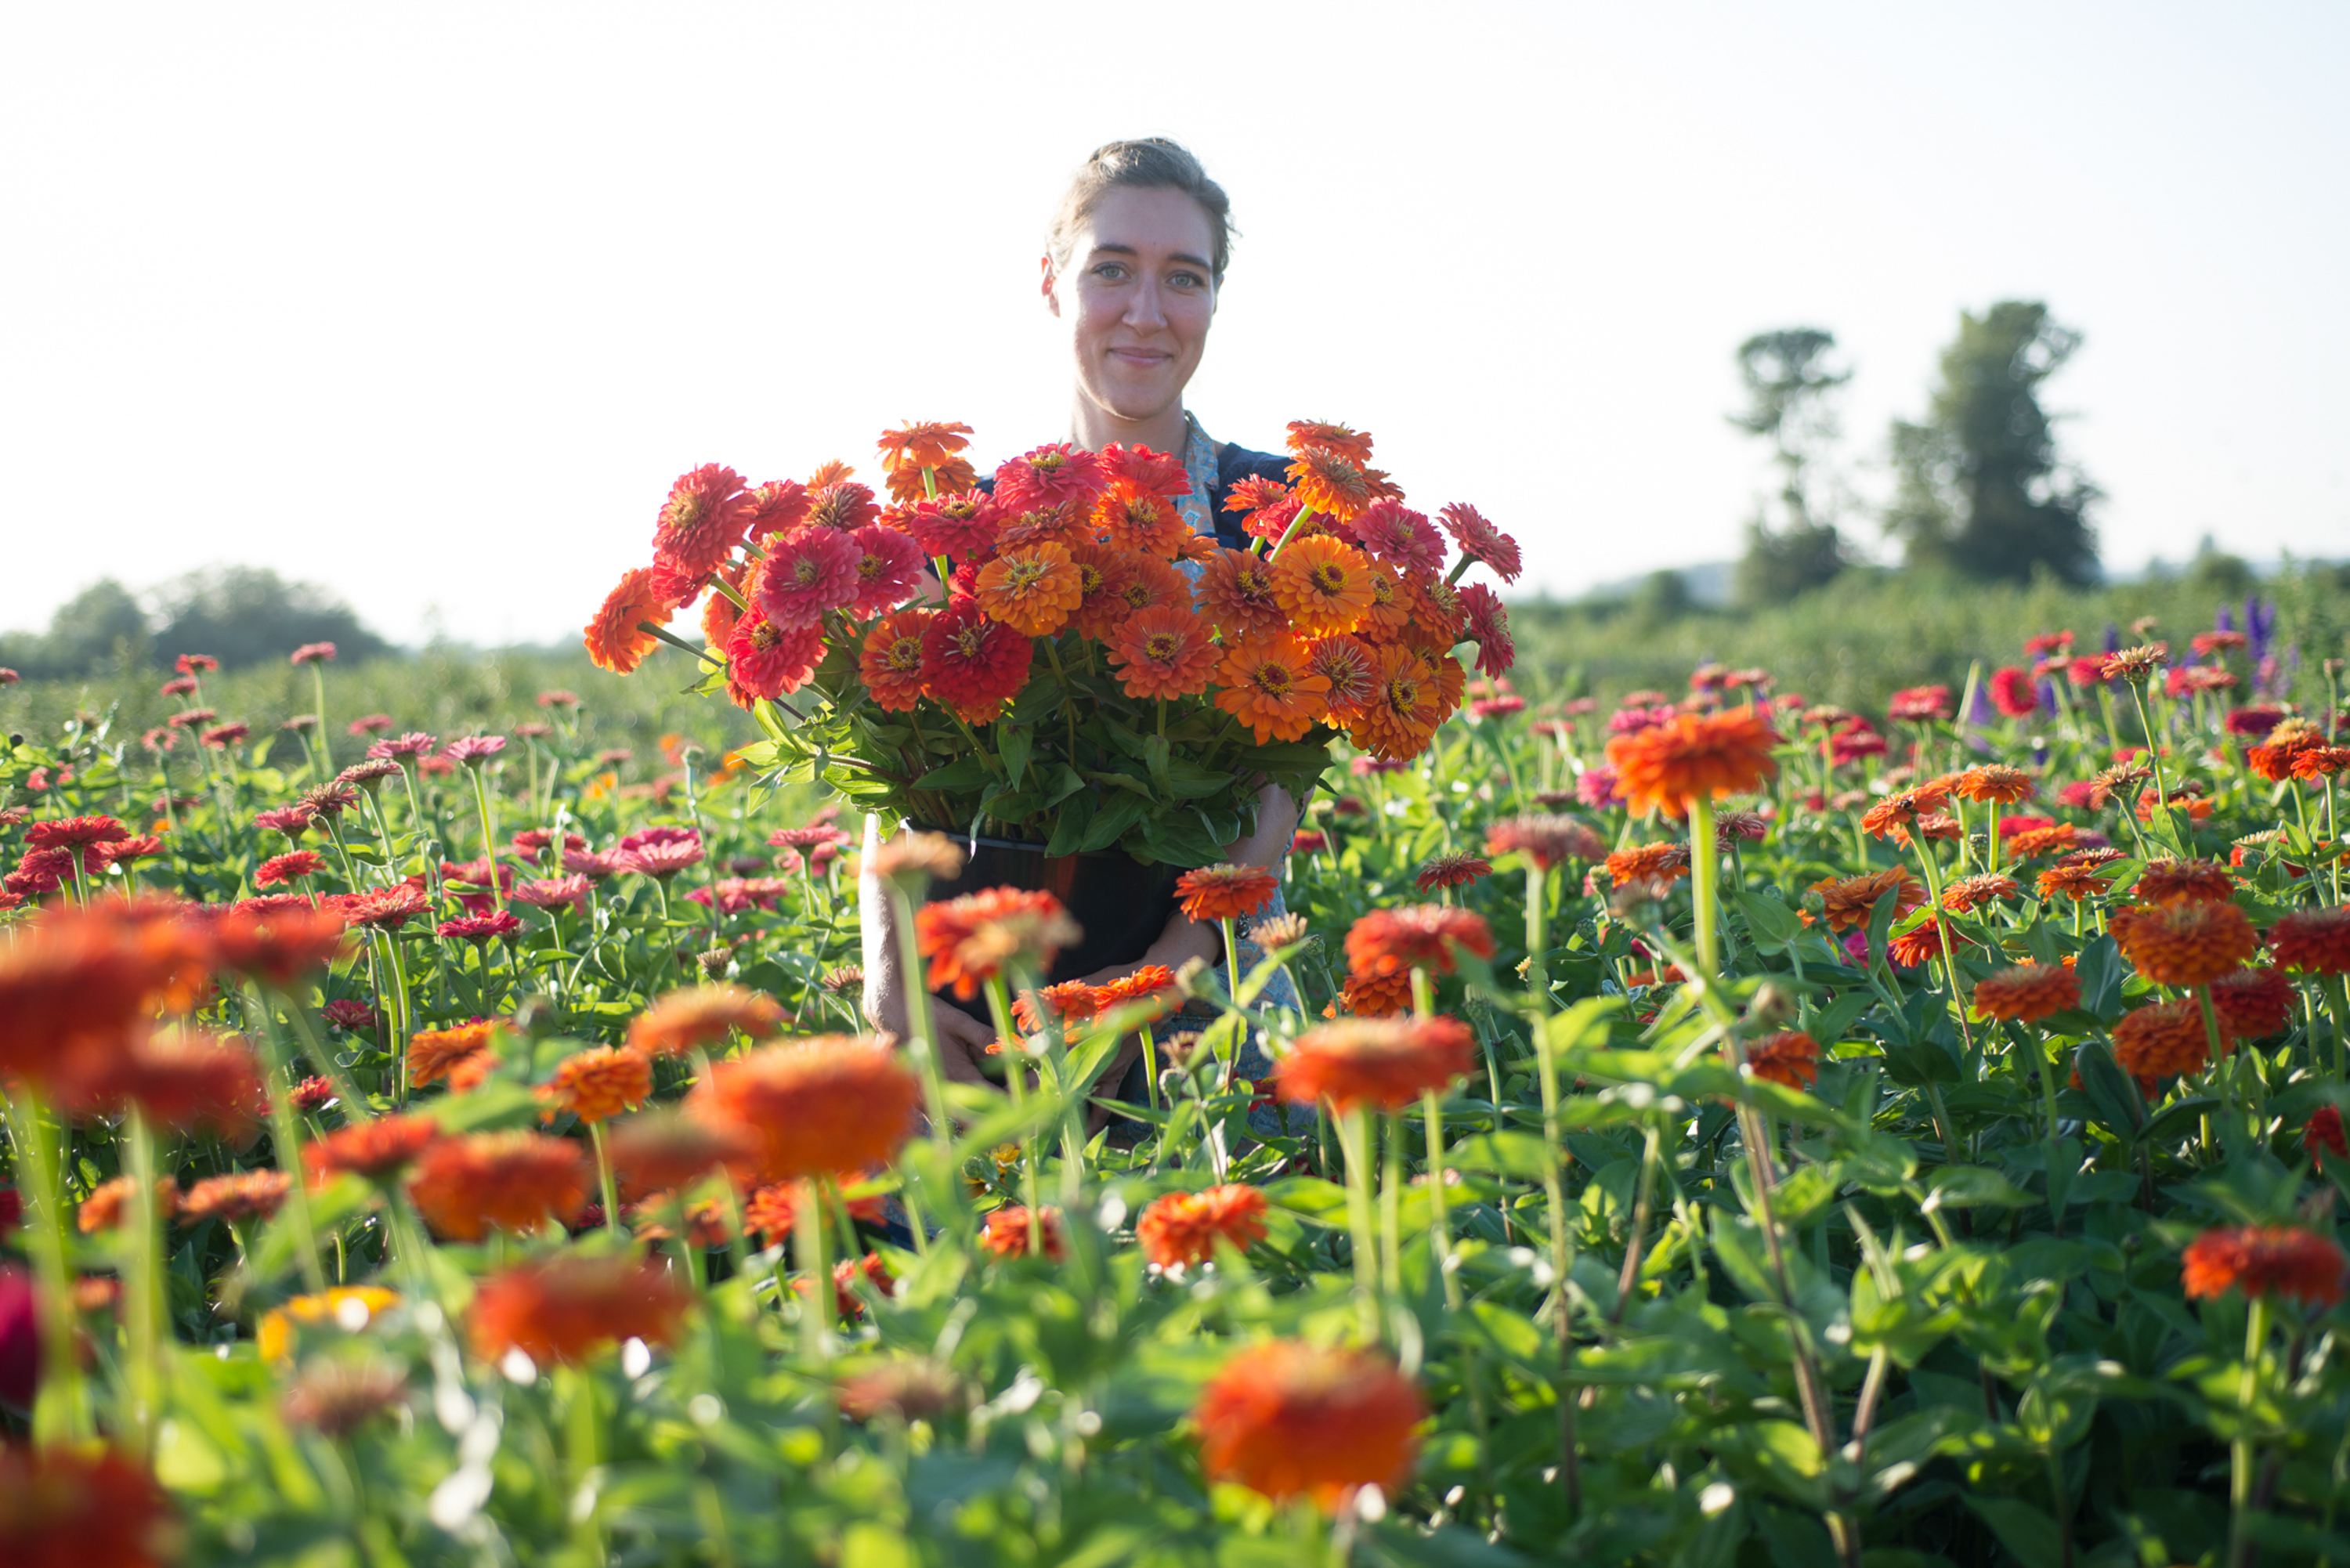 Erin Benzakein with an armload of harvested zinnias in a field of zinnias